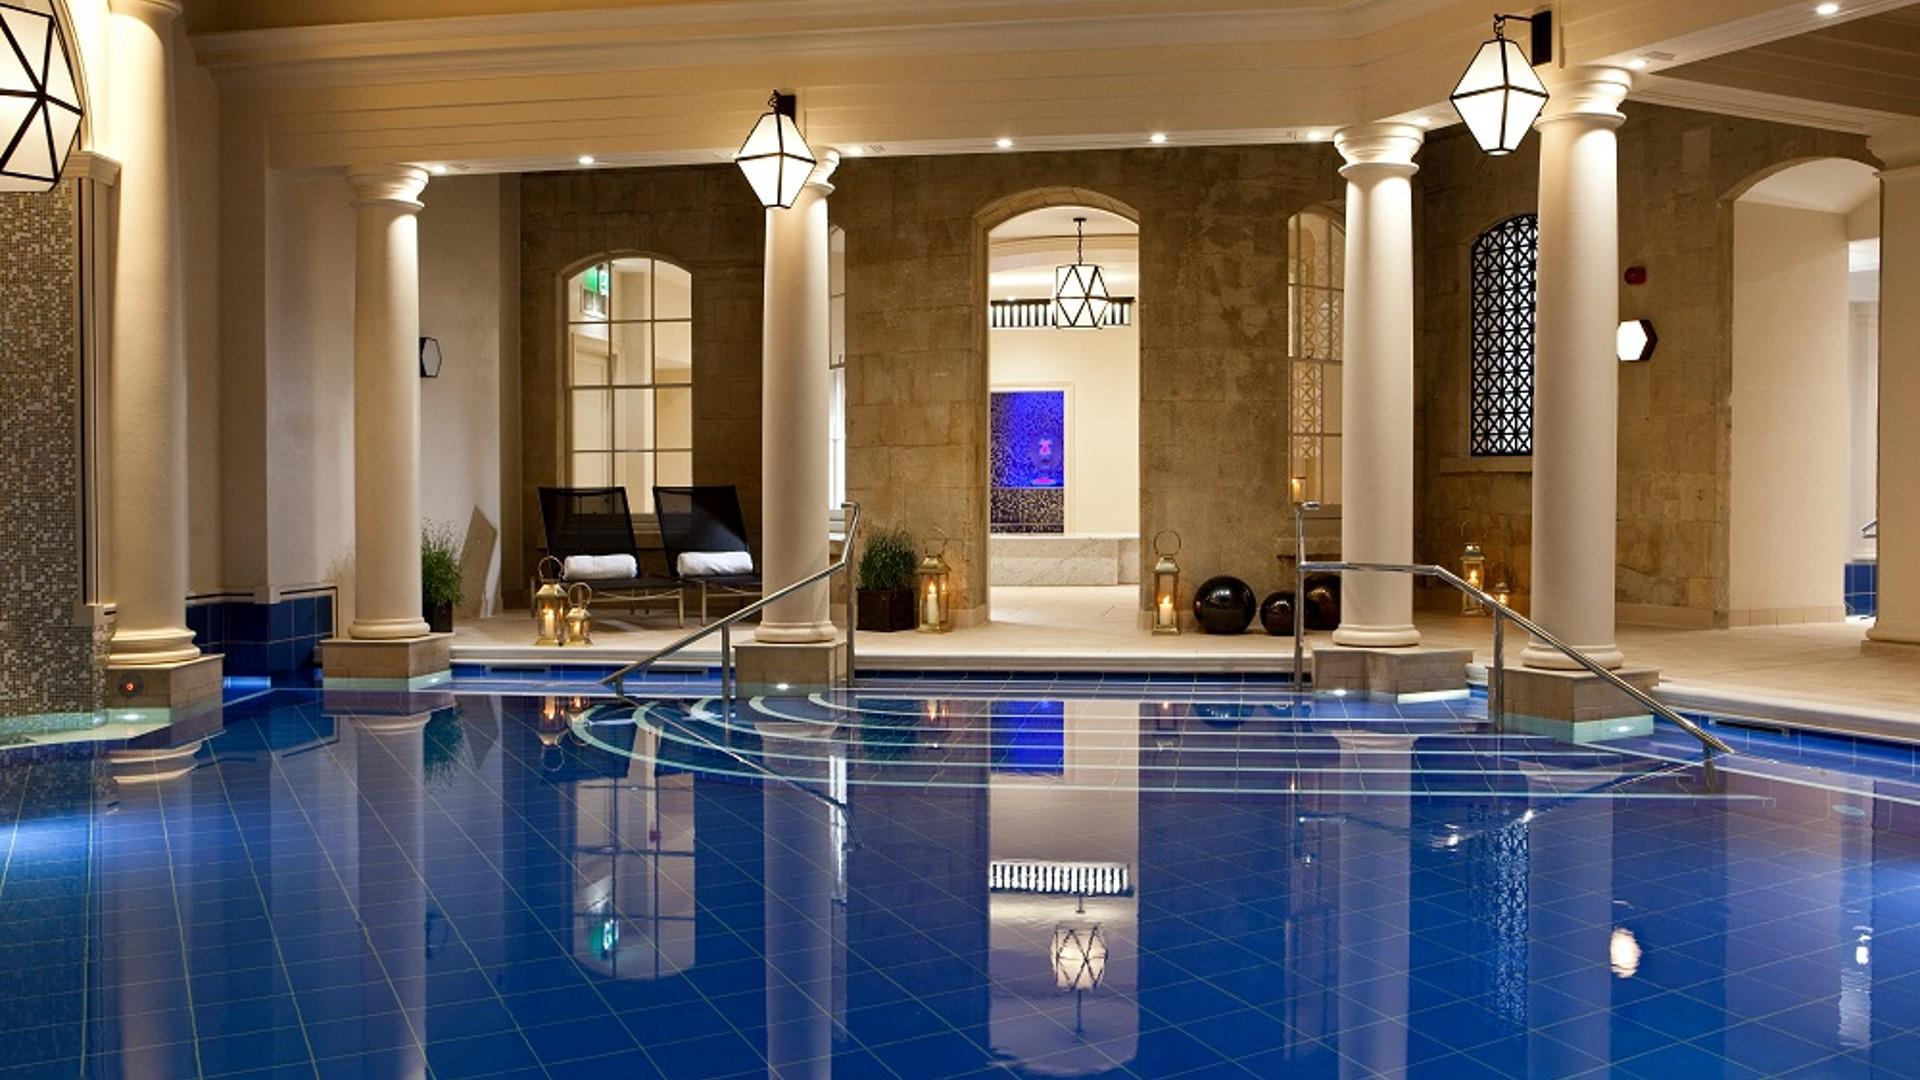 Find places to stay in Bath